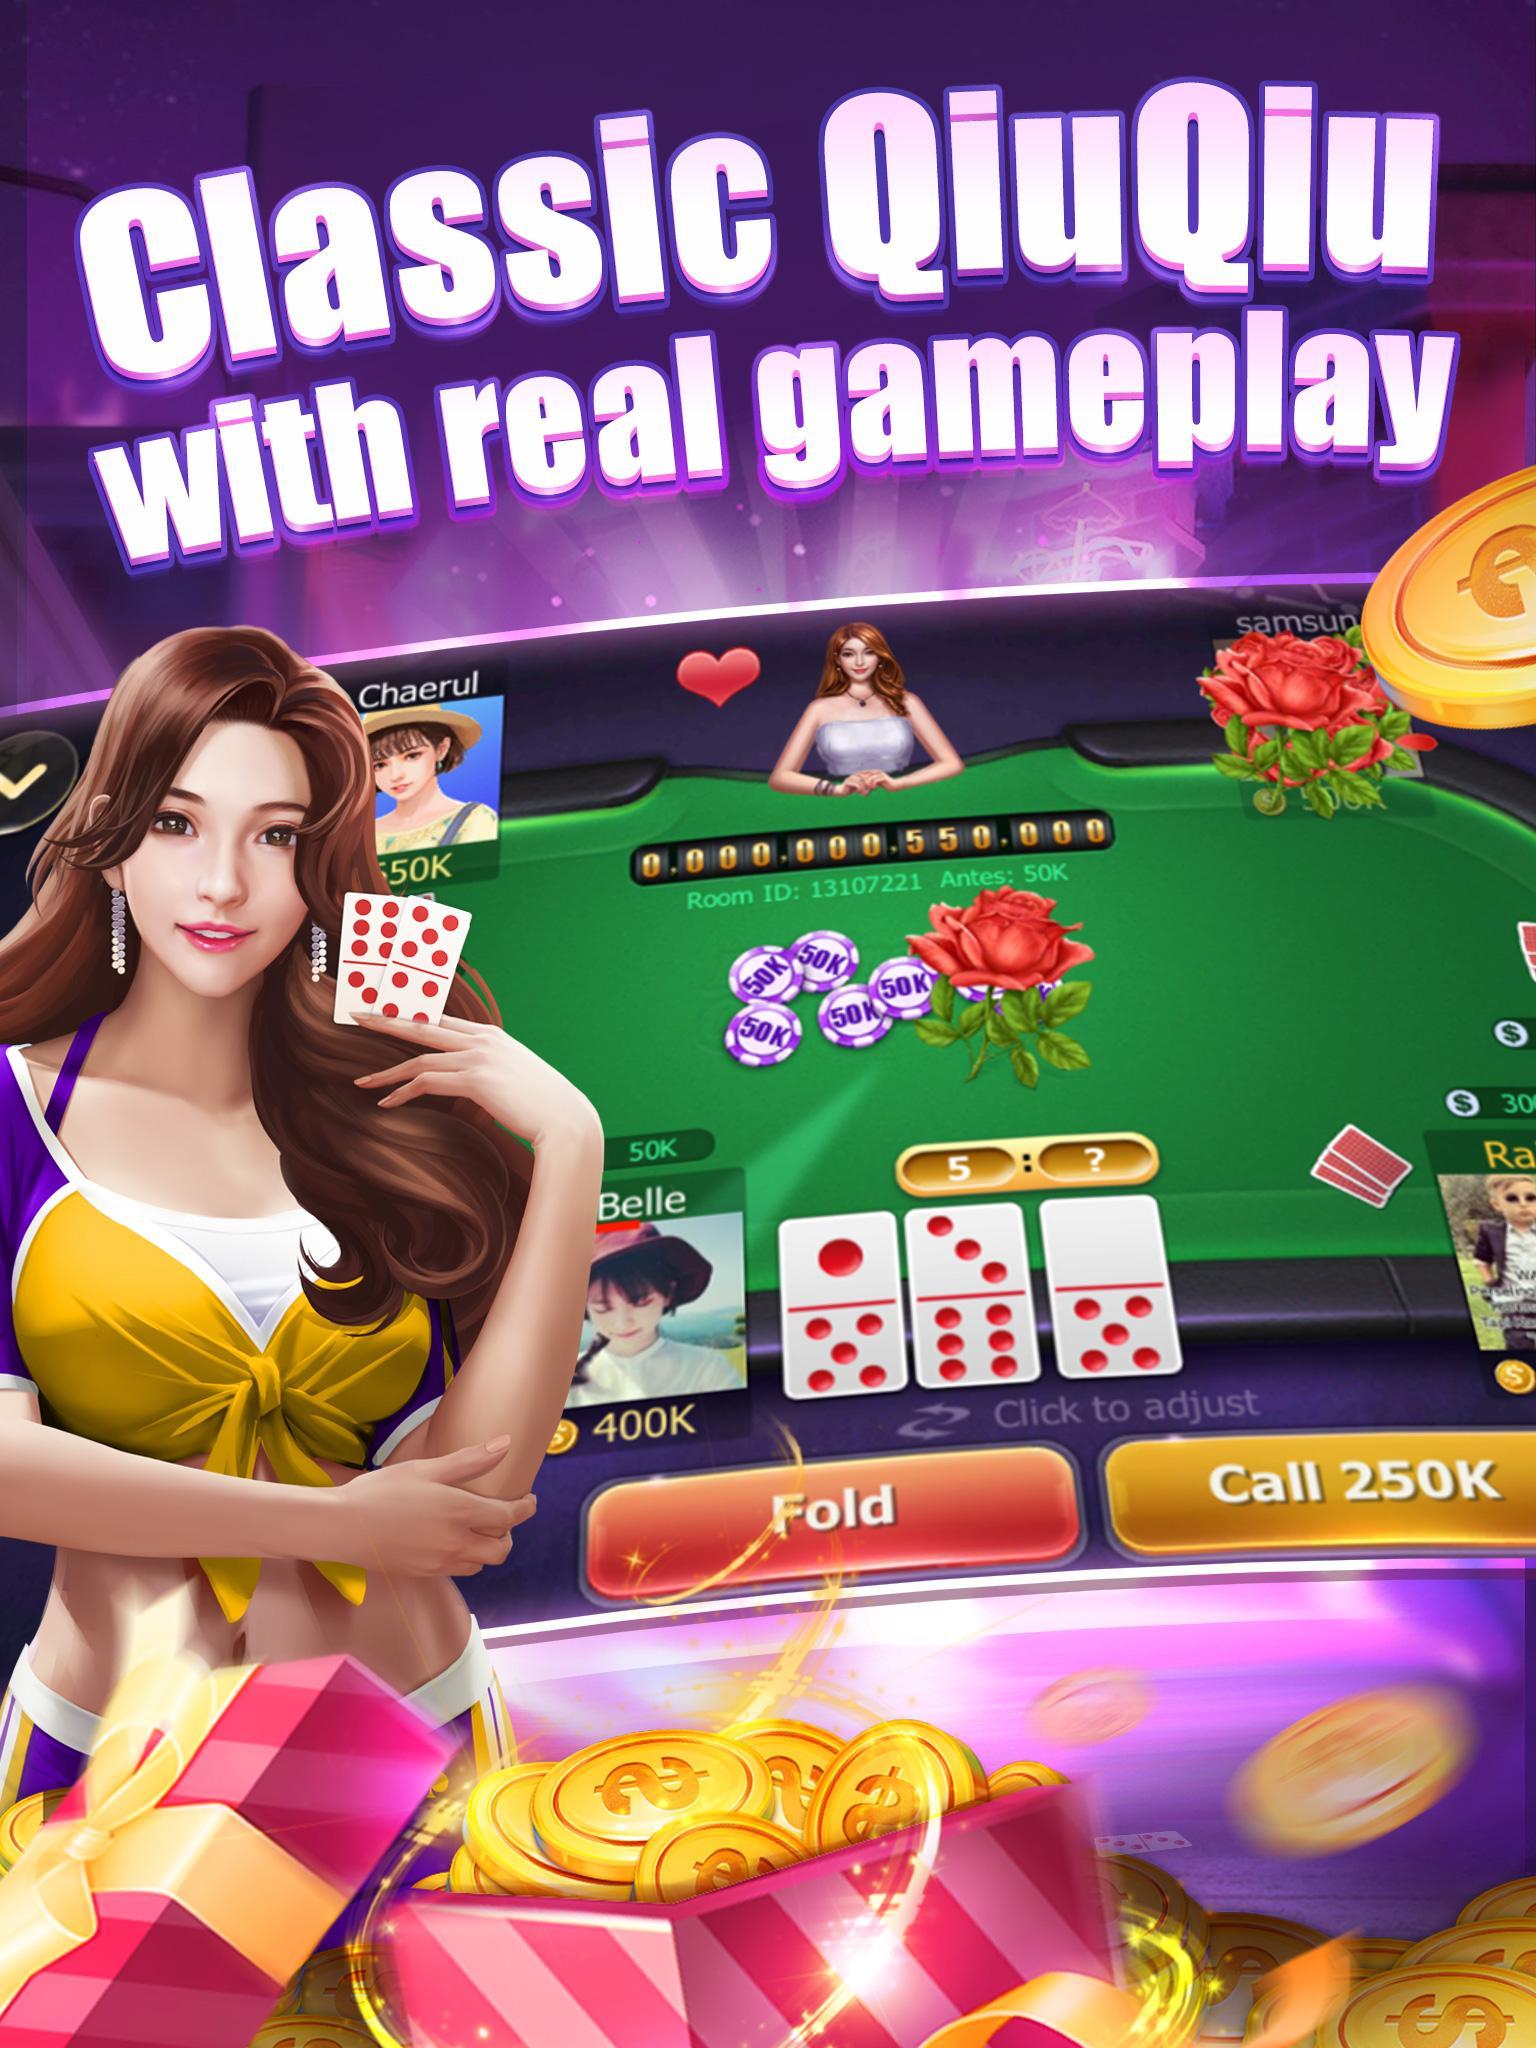 Read more about the article Download Game Domino Qiu Qiu Online Untuk Android, Gaple Capsa Susun: QiuQiu(99)/Texas Remi Online<div class="yasr-vv-stars-title-container"><div class='yasr-stars-title yasr-rater-stars'
                          id='yasr-visitor-votes-readonly-rater-e3c23e8f61257'
                          data-rating='0'
                          data-rater-starsize='16'
                          data-rater-postid='2298'
                          data-rater-readonly='true'
                          data-readonly-attribute='true'
                      ></div><span class='yasr-stars-title-average'>0 (0)</span></div>